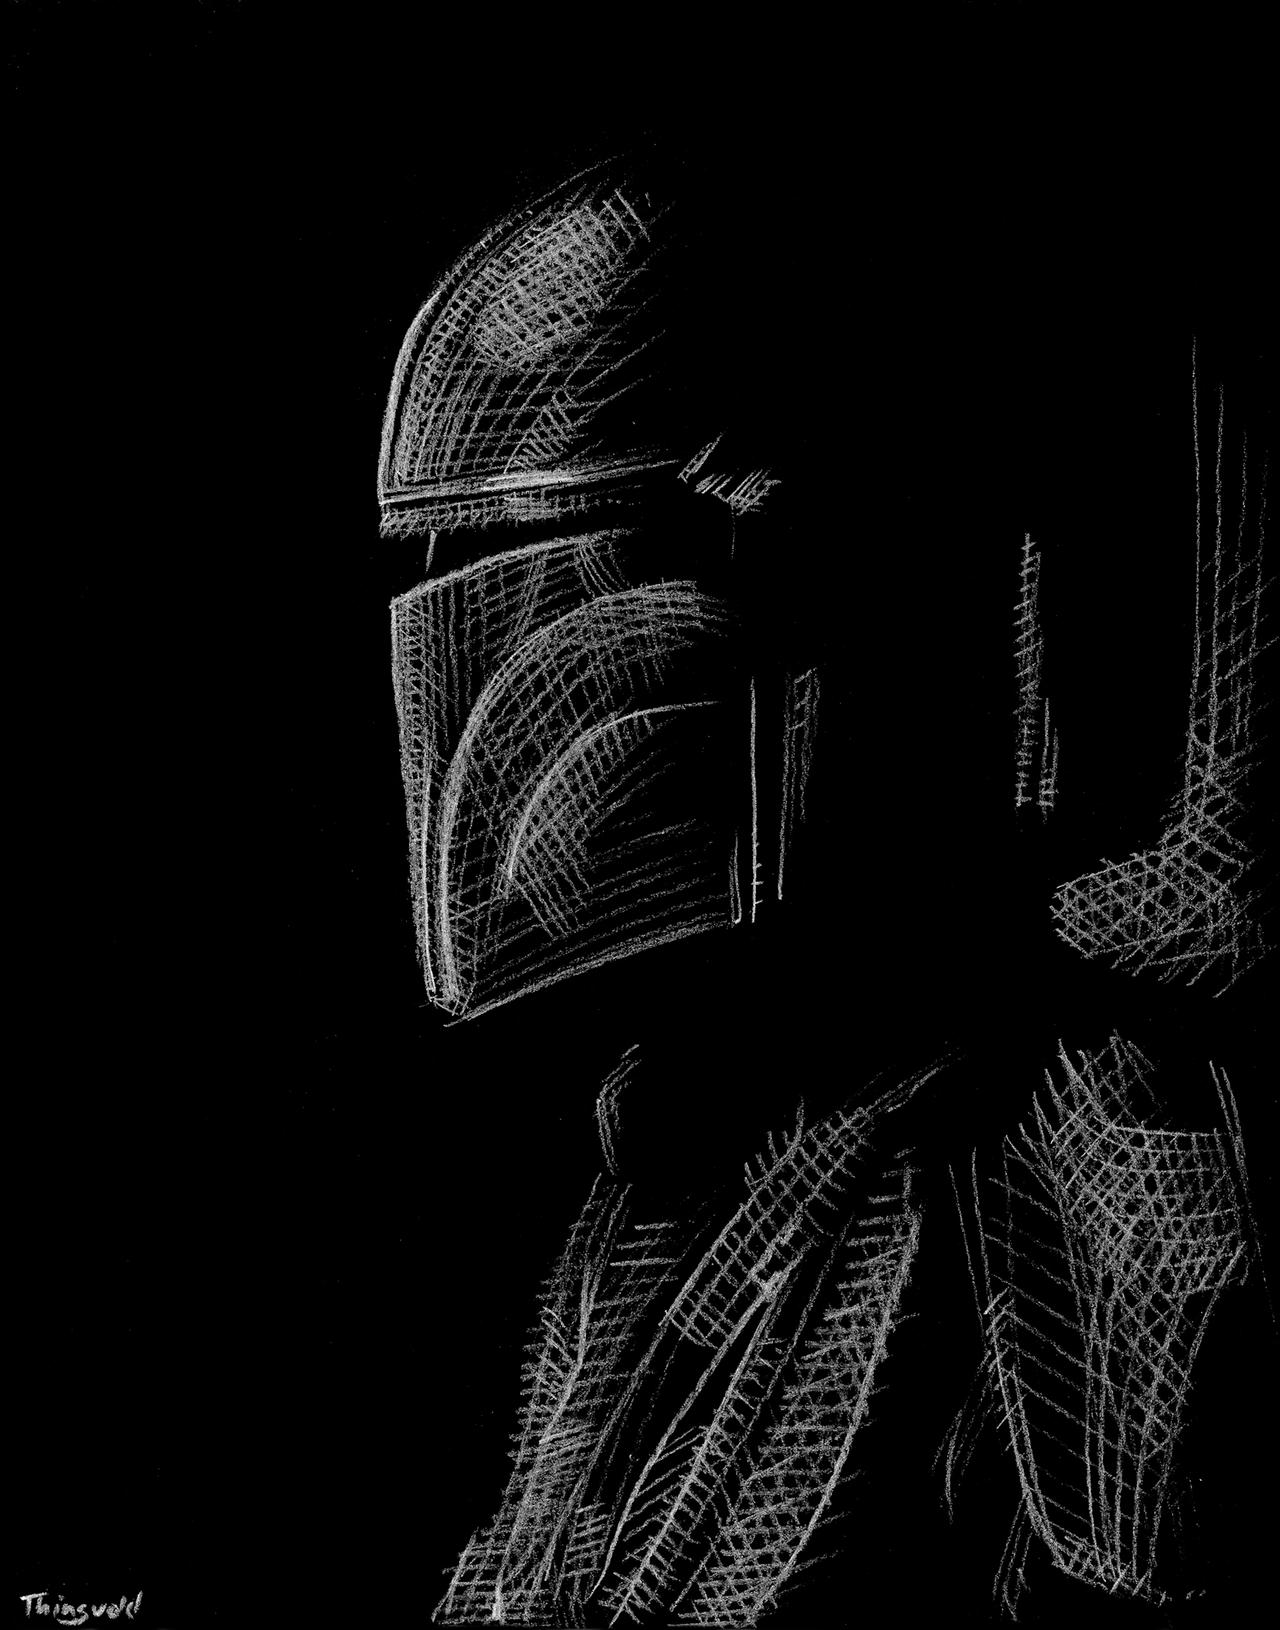 Din Djarin (The Mandalorian) white charcoal by Thingvold on DeviantArt